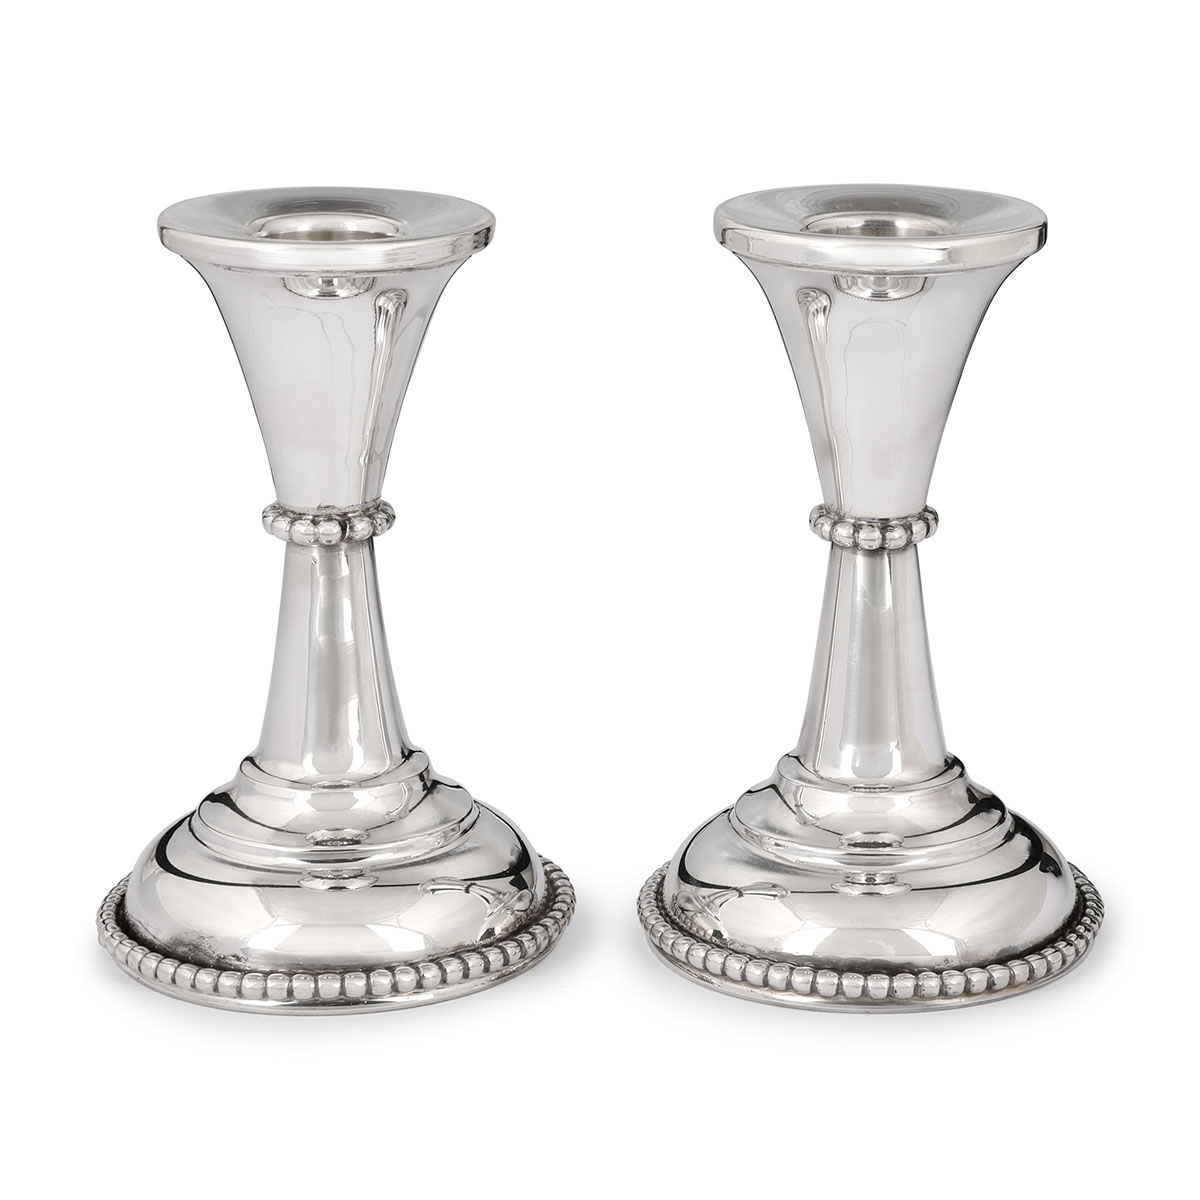 Bier Judaica Handcrafted Sterling Silver Candlesticks With Beaded Design - 1